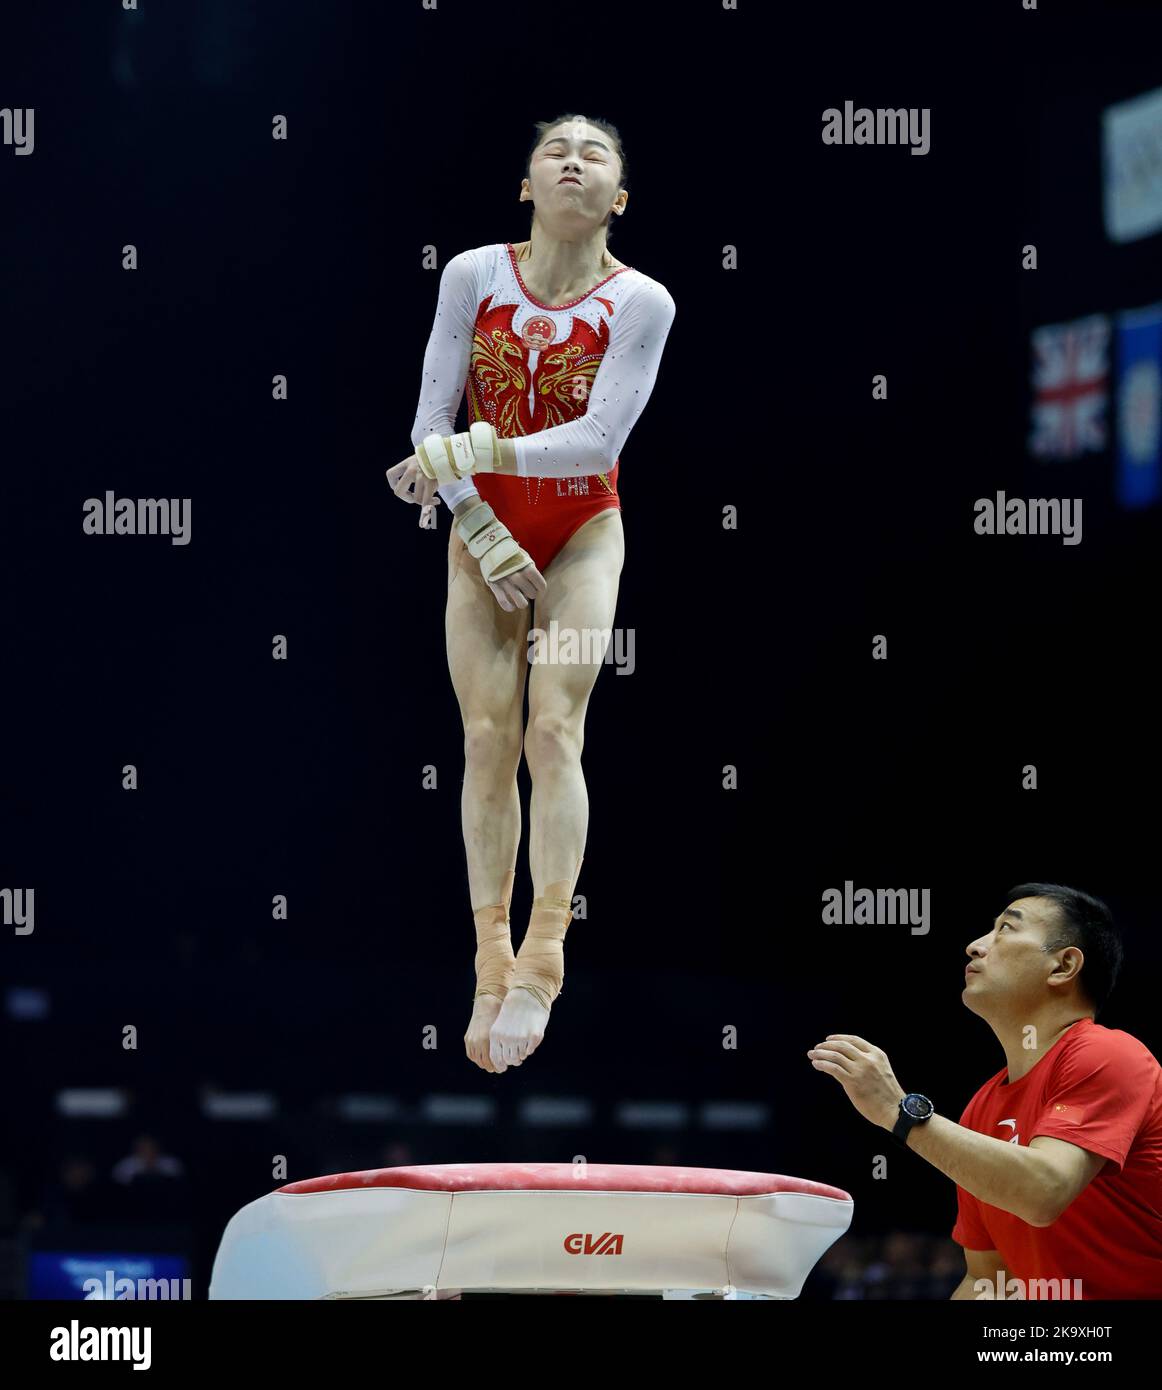 Liverpool, UK. 30th October 2022, M&amp;S Bank Arena, Liverpool, England; 2022 World Artistic Gymnastics Championships; Women's Qualification Vault - Xijing Tang (CHN) Tokyo 2020 Olympic balance beam silver medallist watched by coach Credit: Action Plus Sports Images/Alamy Live News Stock Photo